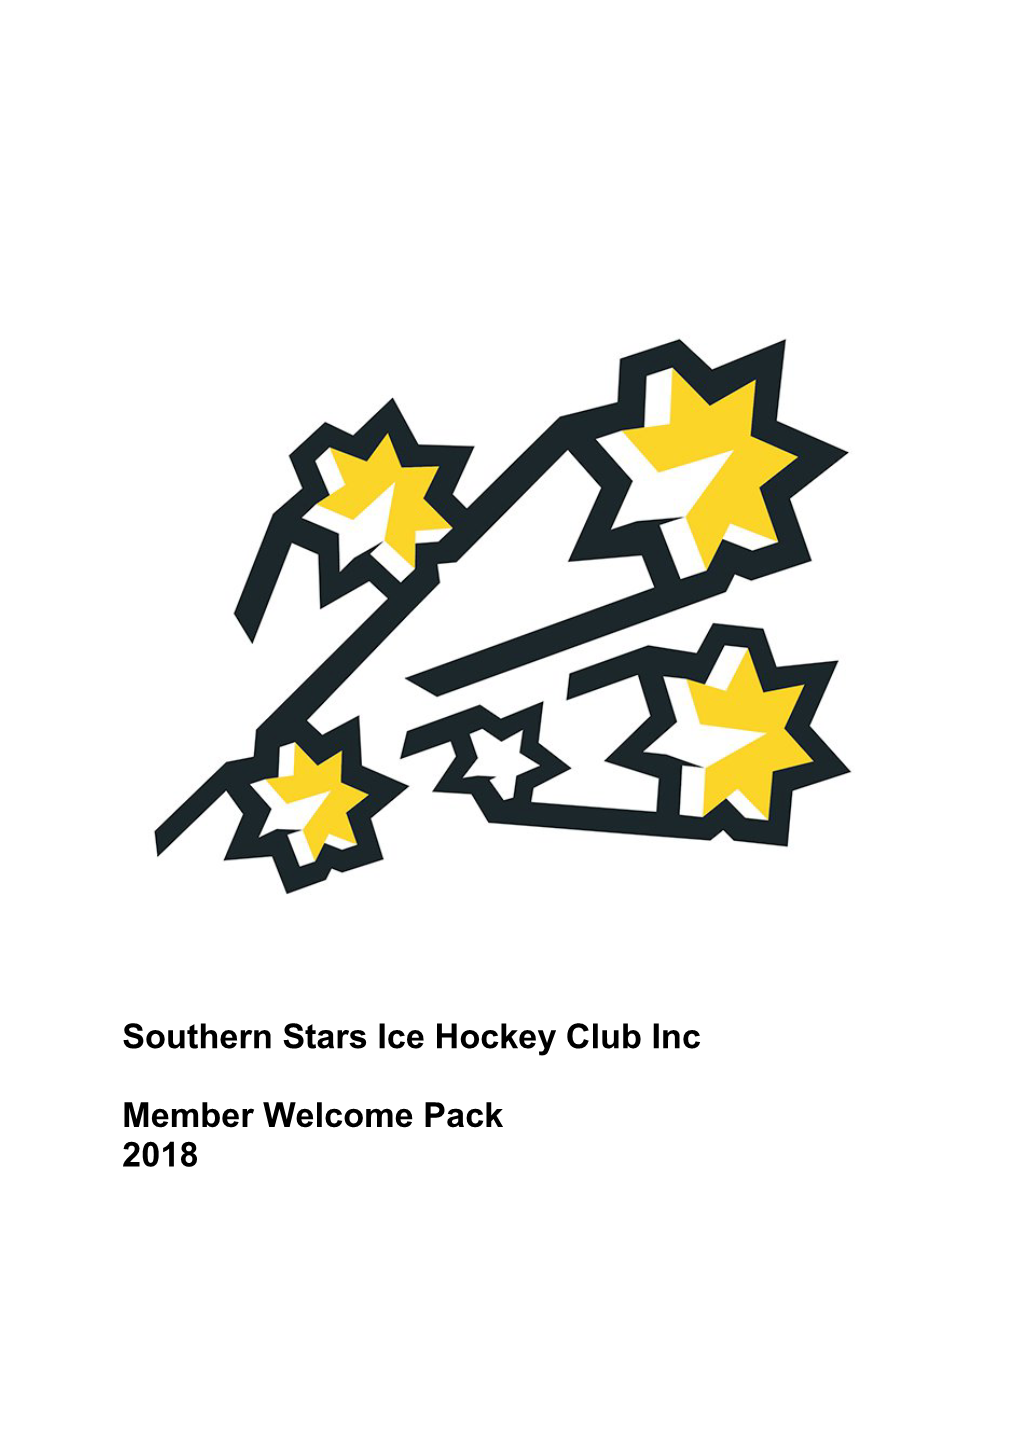 Southern Stars Ice Hockey Club Inc Member Welcome Pack 2018